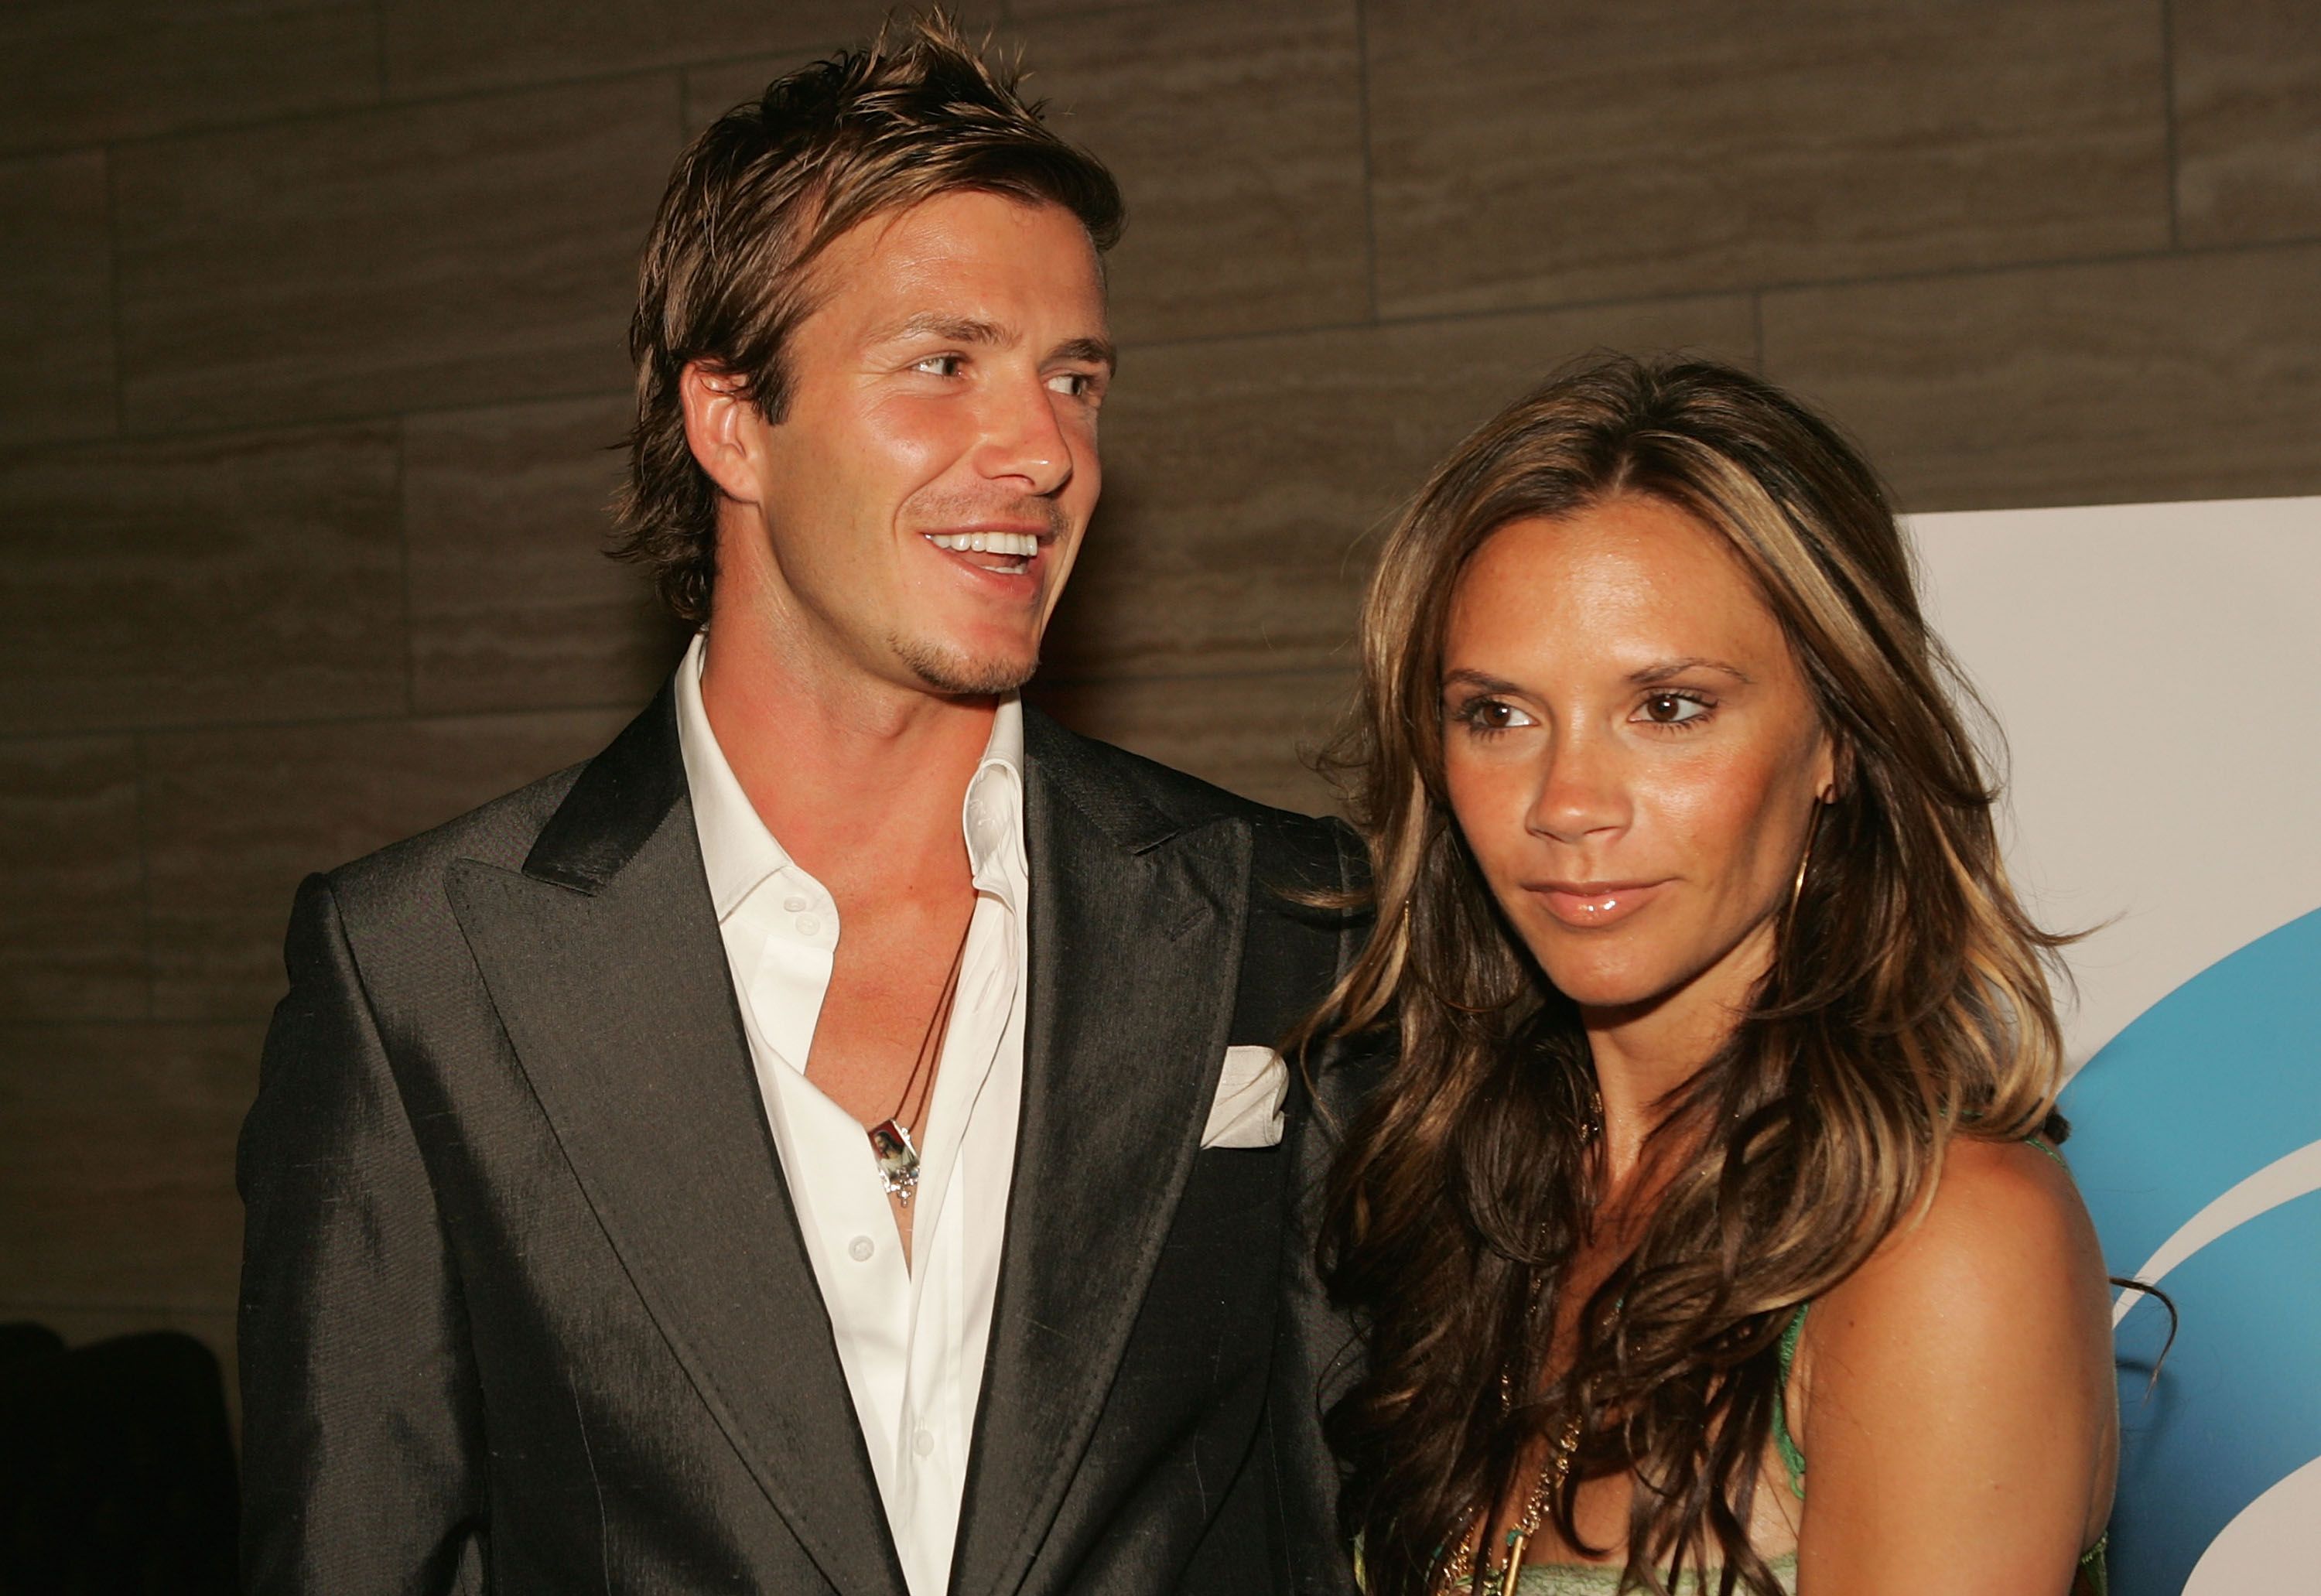 David Beckham and wife Victoria pose at "The David Beckham Academy" launch party at Creative Artists Agency on June 3, 2005 in Beverly Hills, California. | Source: Getty Images